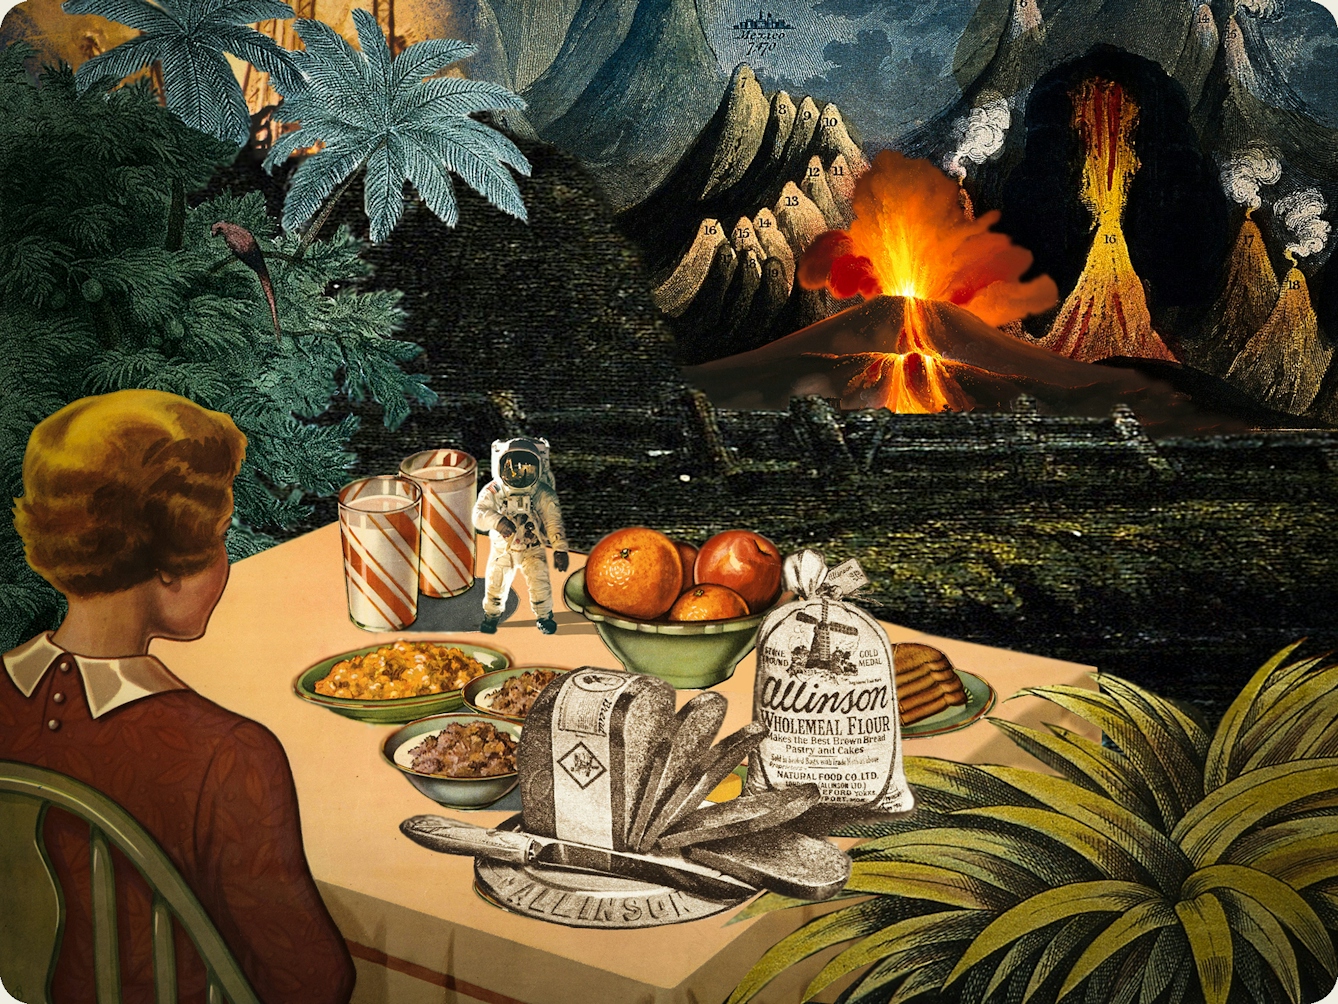 Artwork using collage. The collaged elements are made up of archive material which includes vintage and contemporary photographs, etchings, painted illustrations, lithographic prints and line drawings. This artwork depicts a scene with elements of outer space. In the background are volcanic like mountain peaks, some of which are erupting. In the foreground to the left a woman is sat at a kitchen table with her back to the viewer. On the table is a loaf of sliced bread, bowls of cereal, two glasses of milk, a bowl of fruit and very small astronaut.